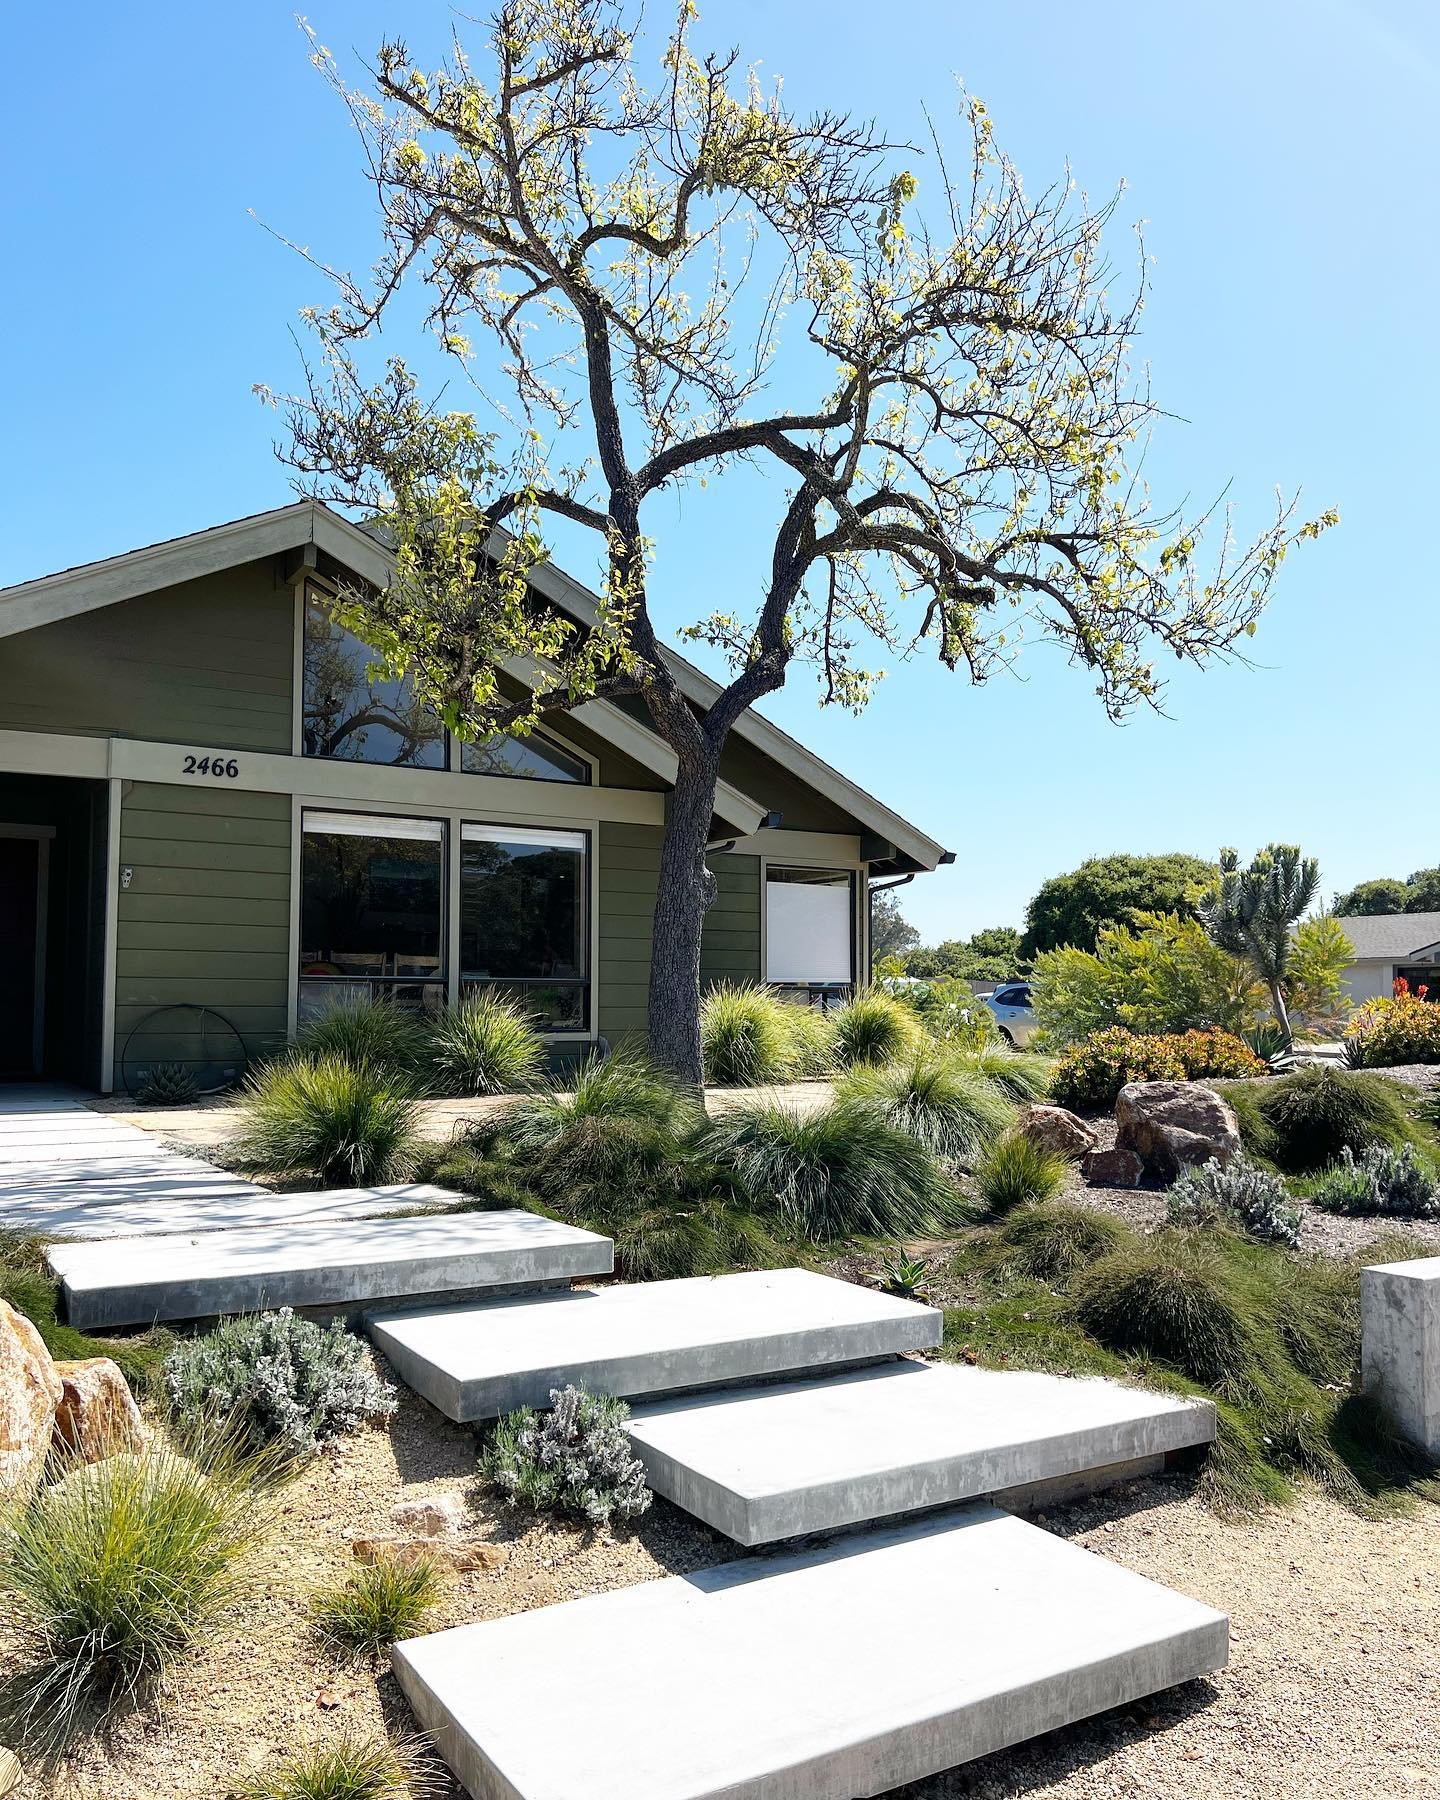 We&rsquo;ve come a long way! To truly appreciate how far, swipe for the before. ✨
.
.
.
#landscapedesign #landscapedesigner #shareslo #805living #gardendesign #landscaperenovation #droughttolerant #designforliving #sunsetmag #sanluisobispo #californi